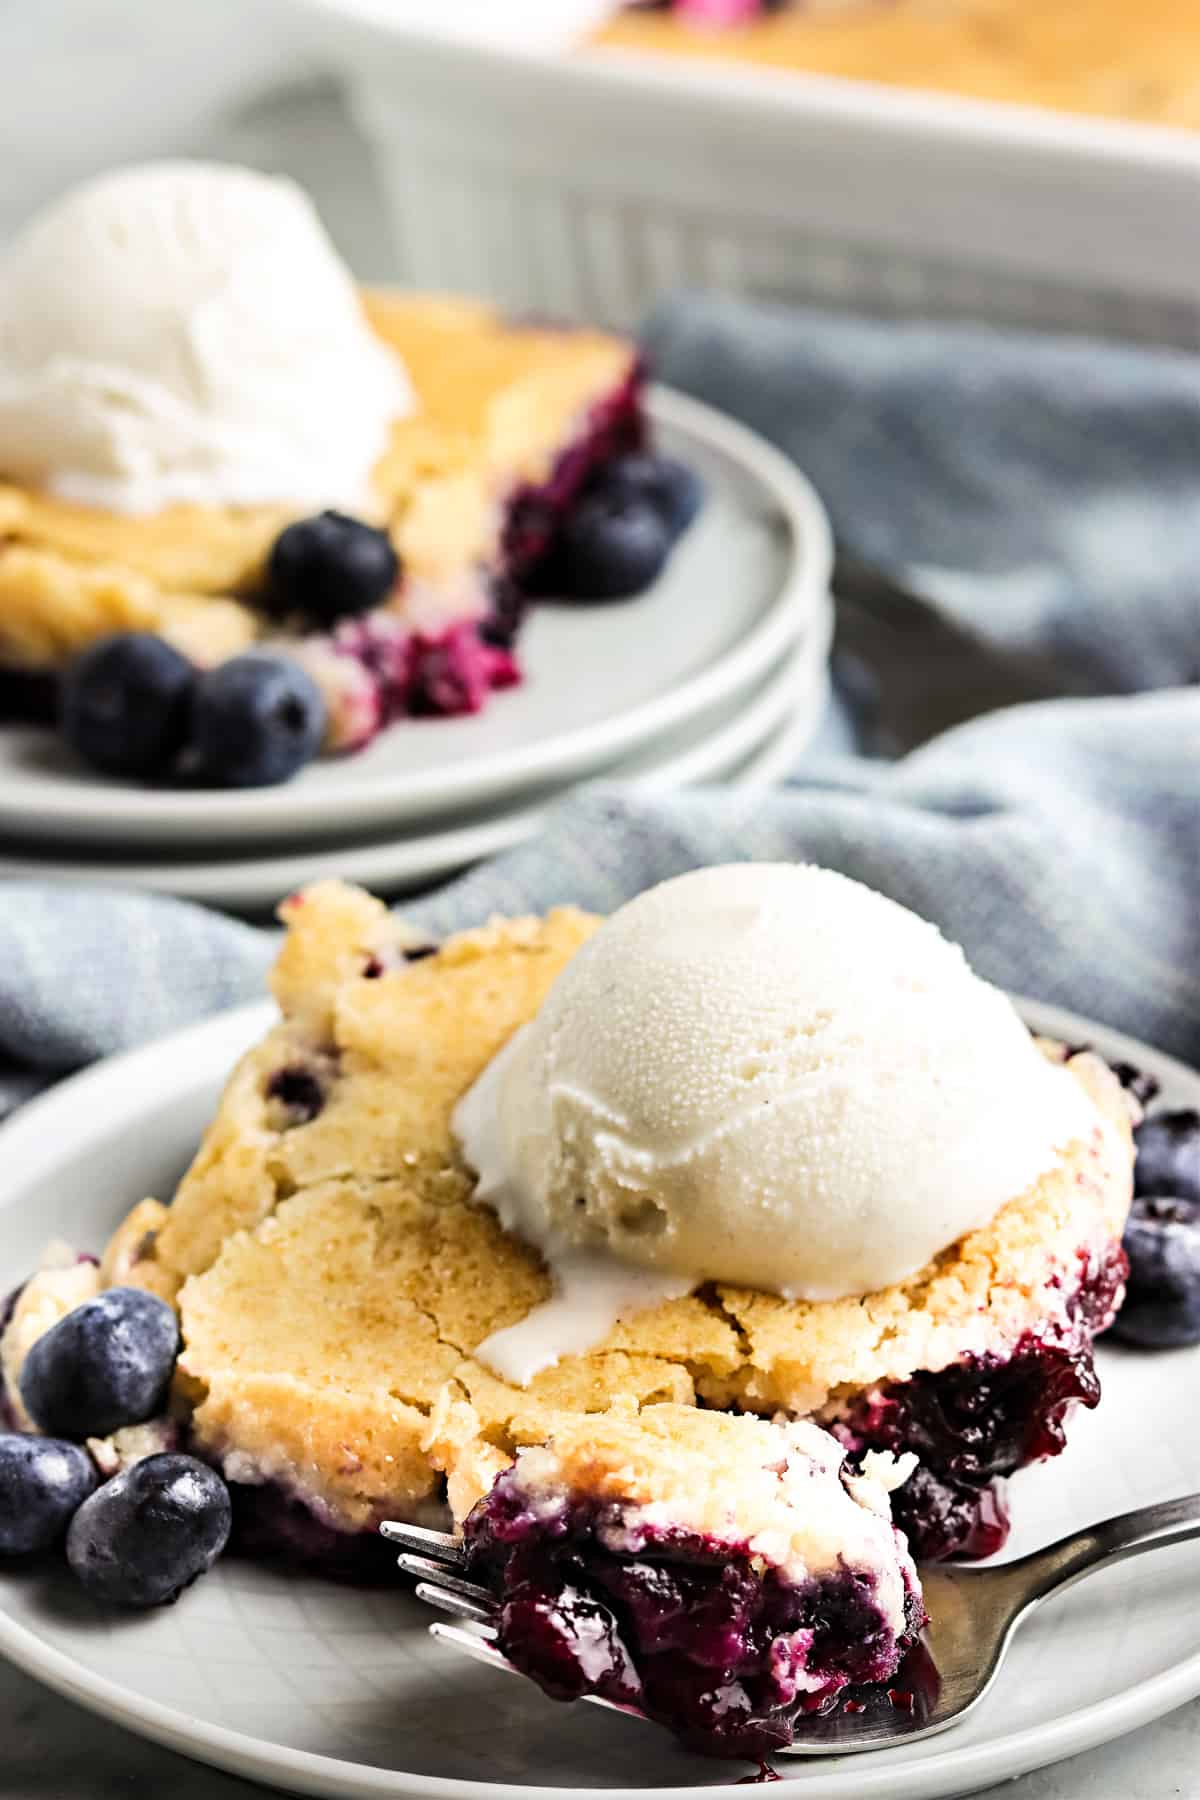 Blueberry cobbler with ice cream on plate